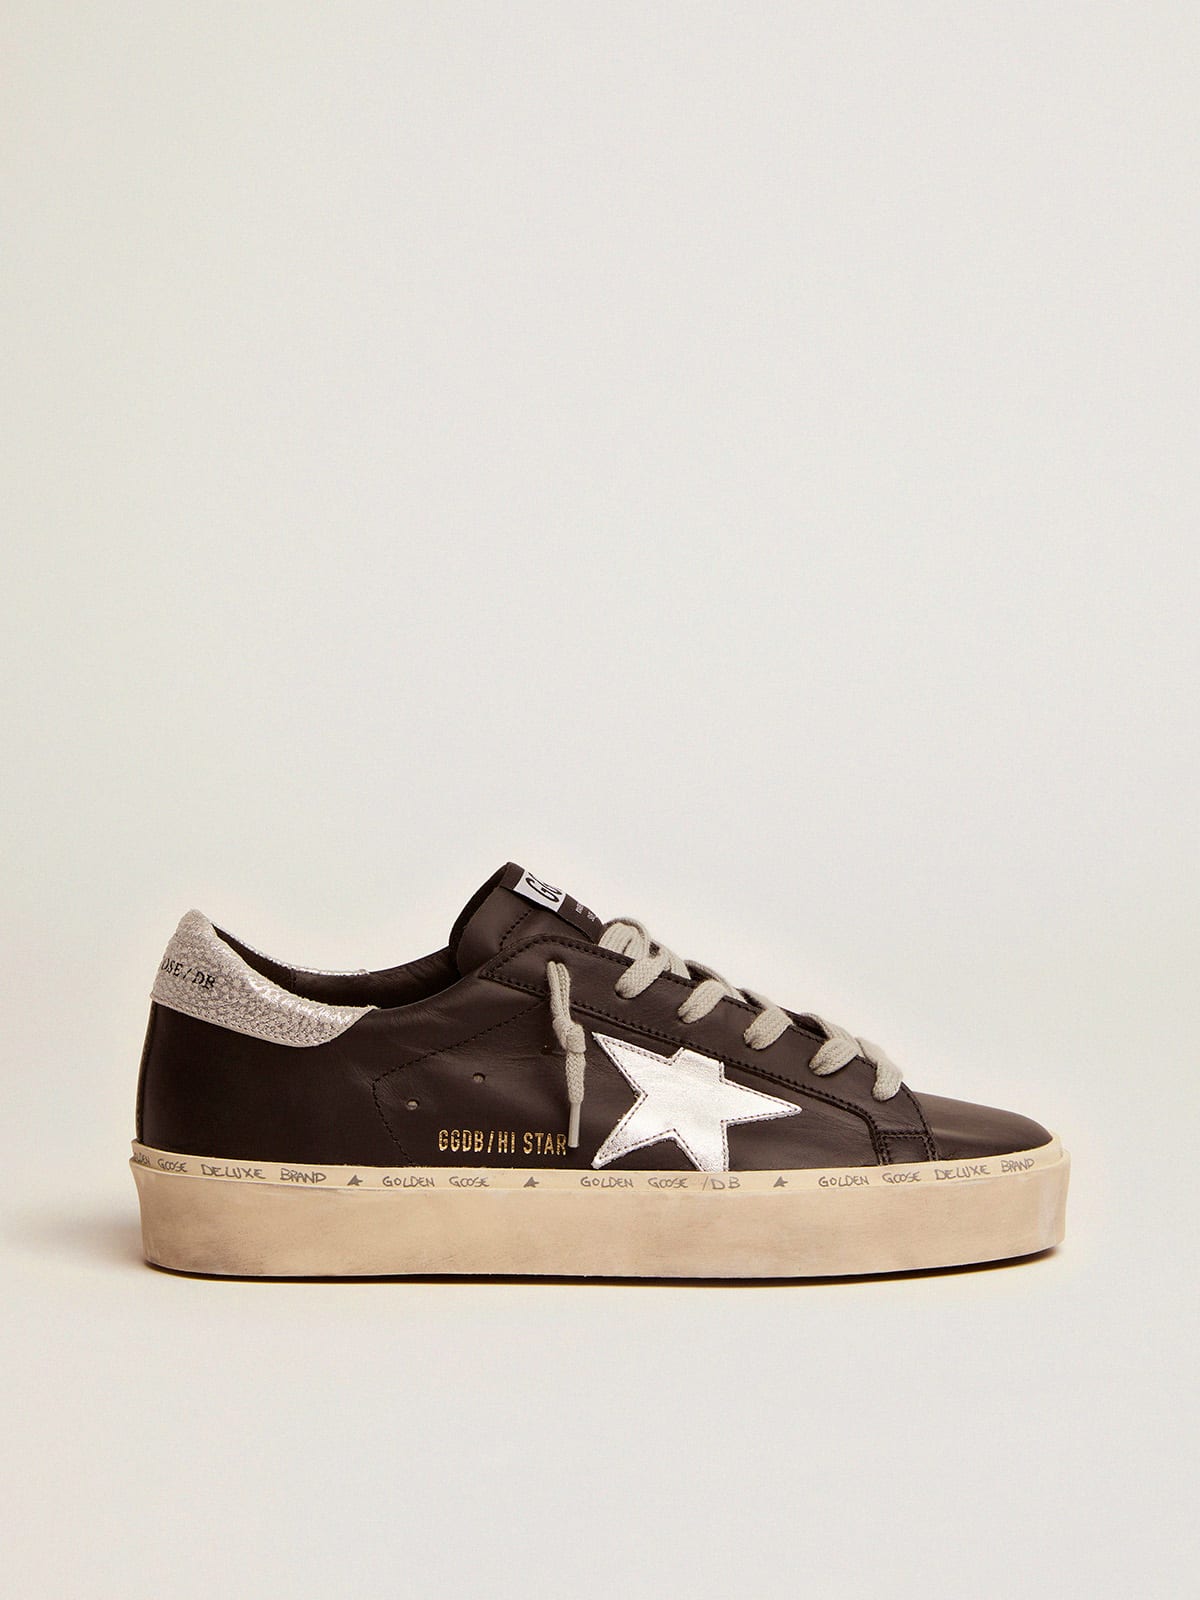 Women's Hi Star in black leather with silver laminated leather star